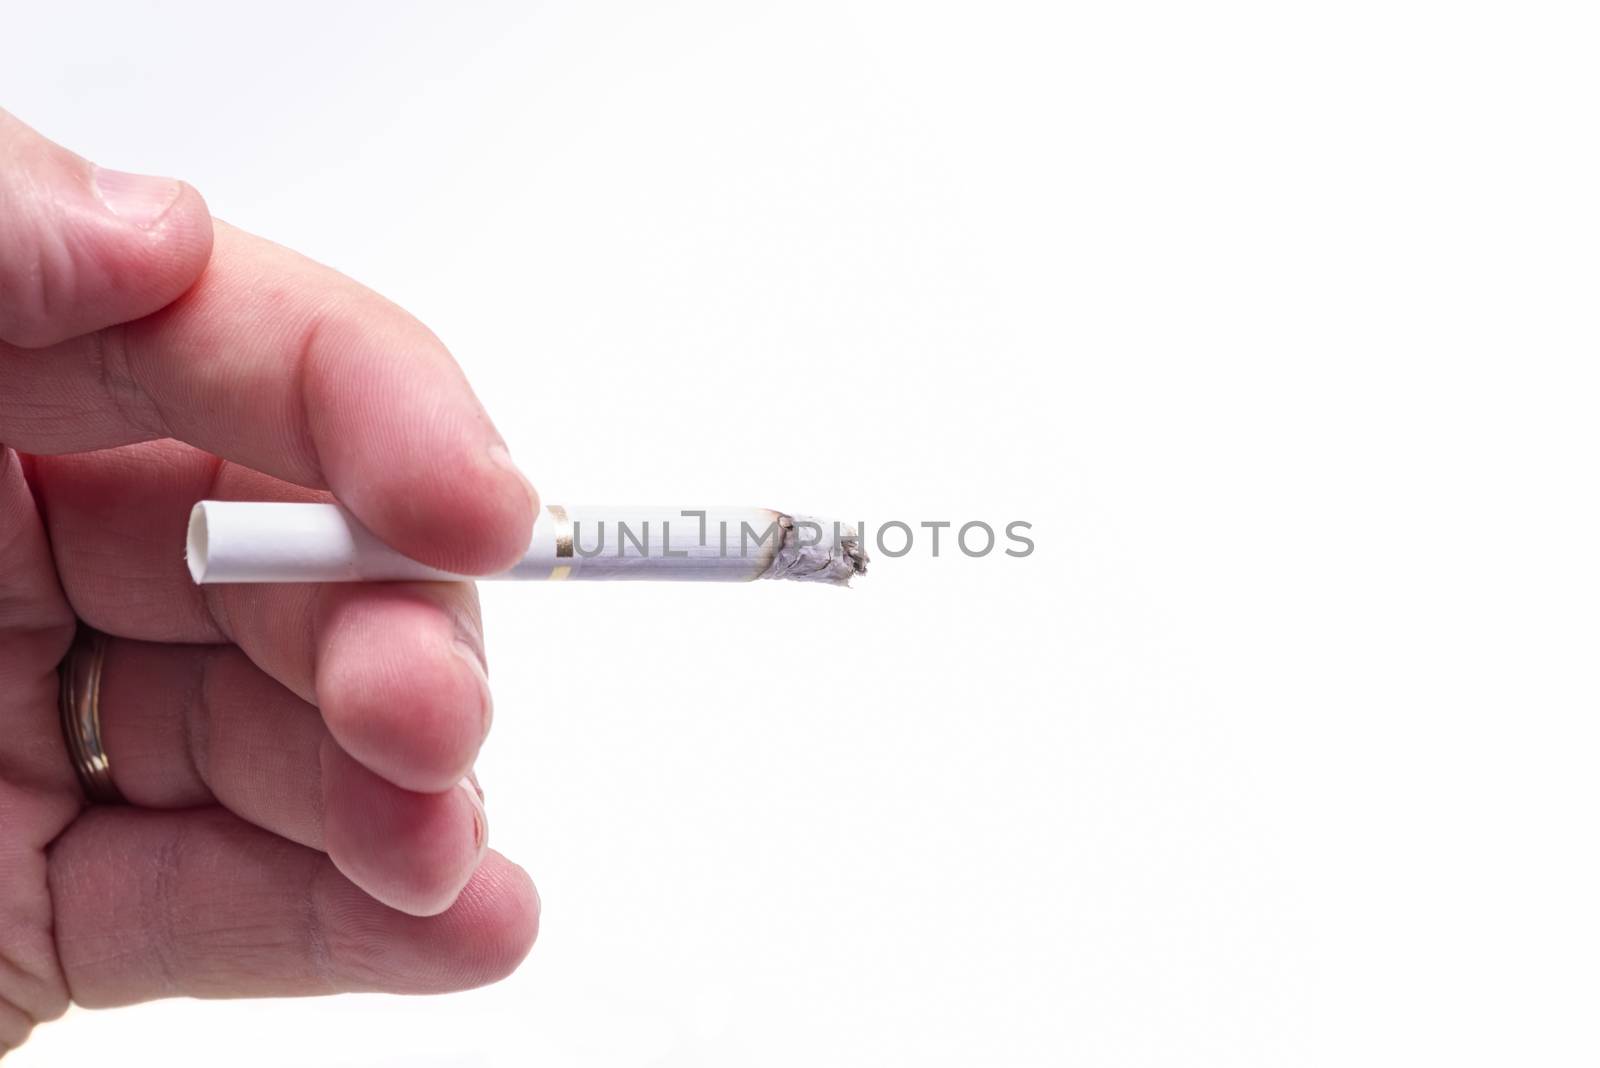 Man hand and burning cigarette isolated over white